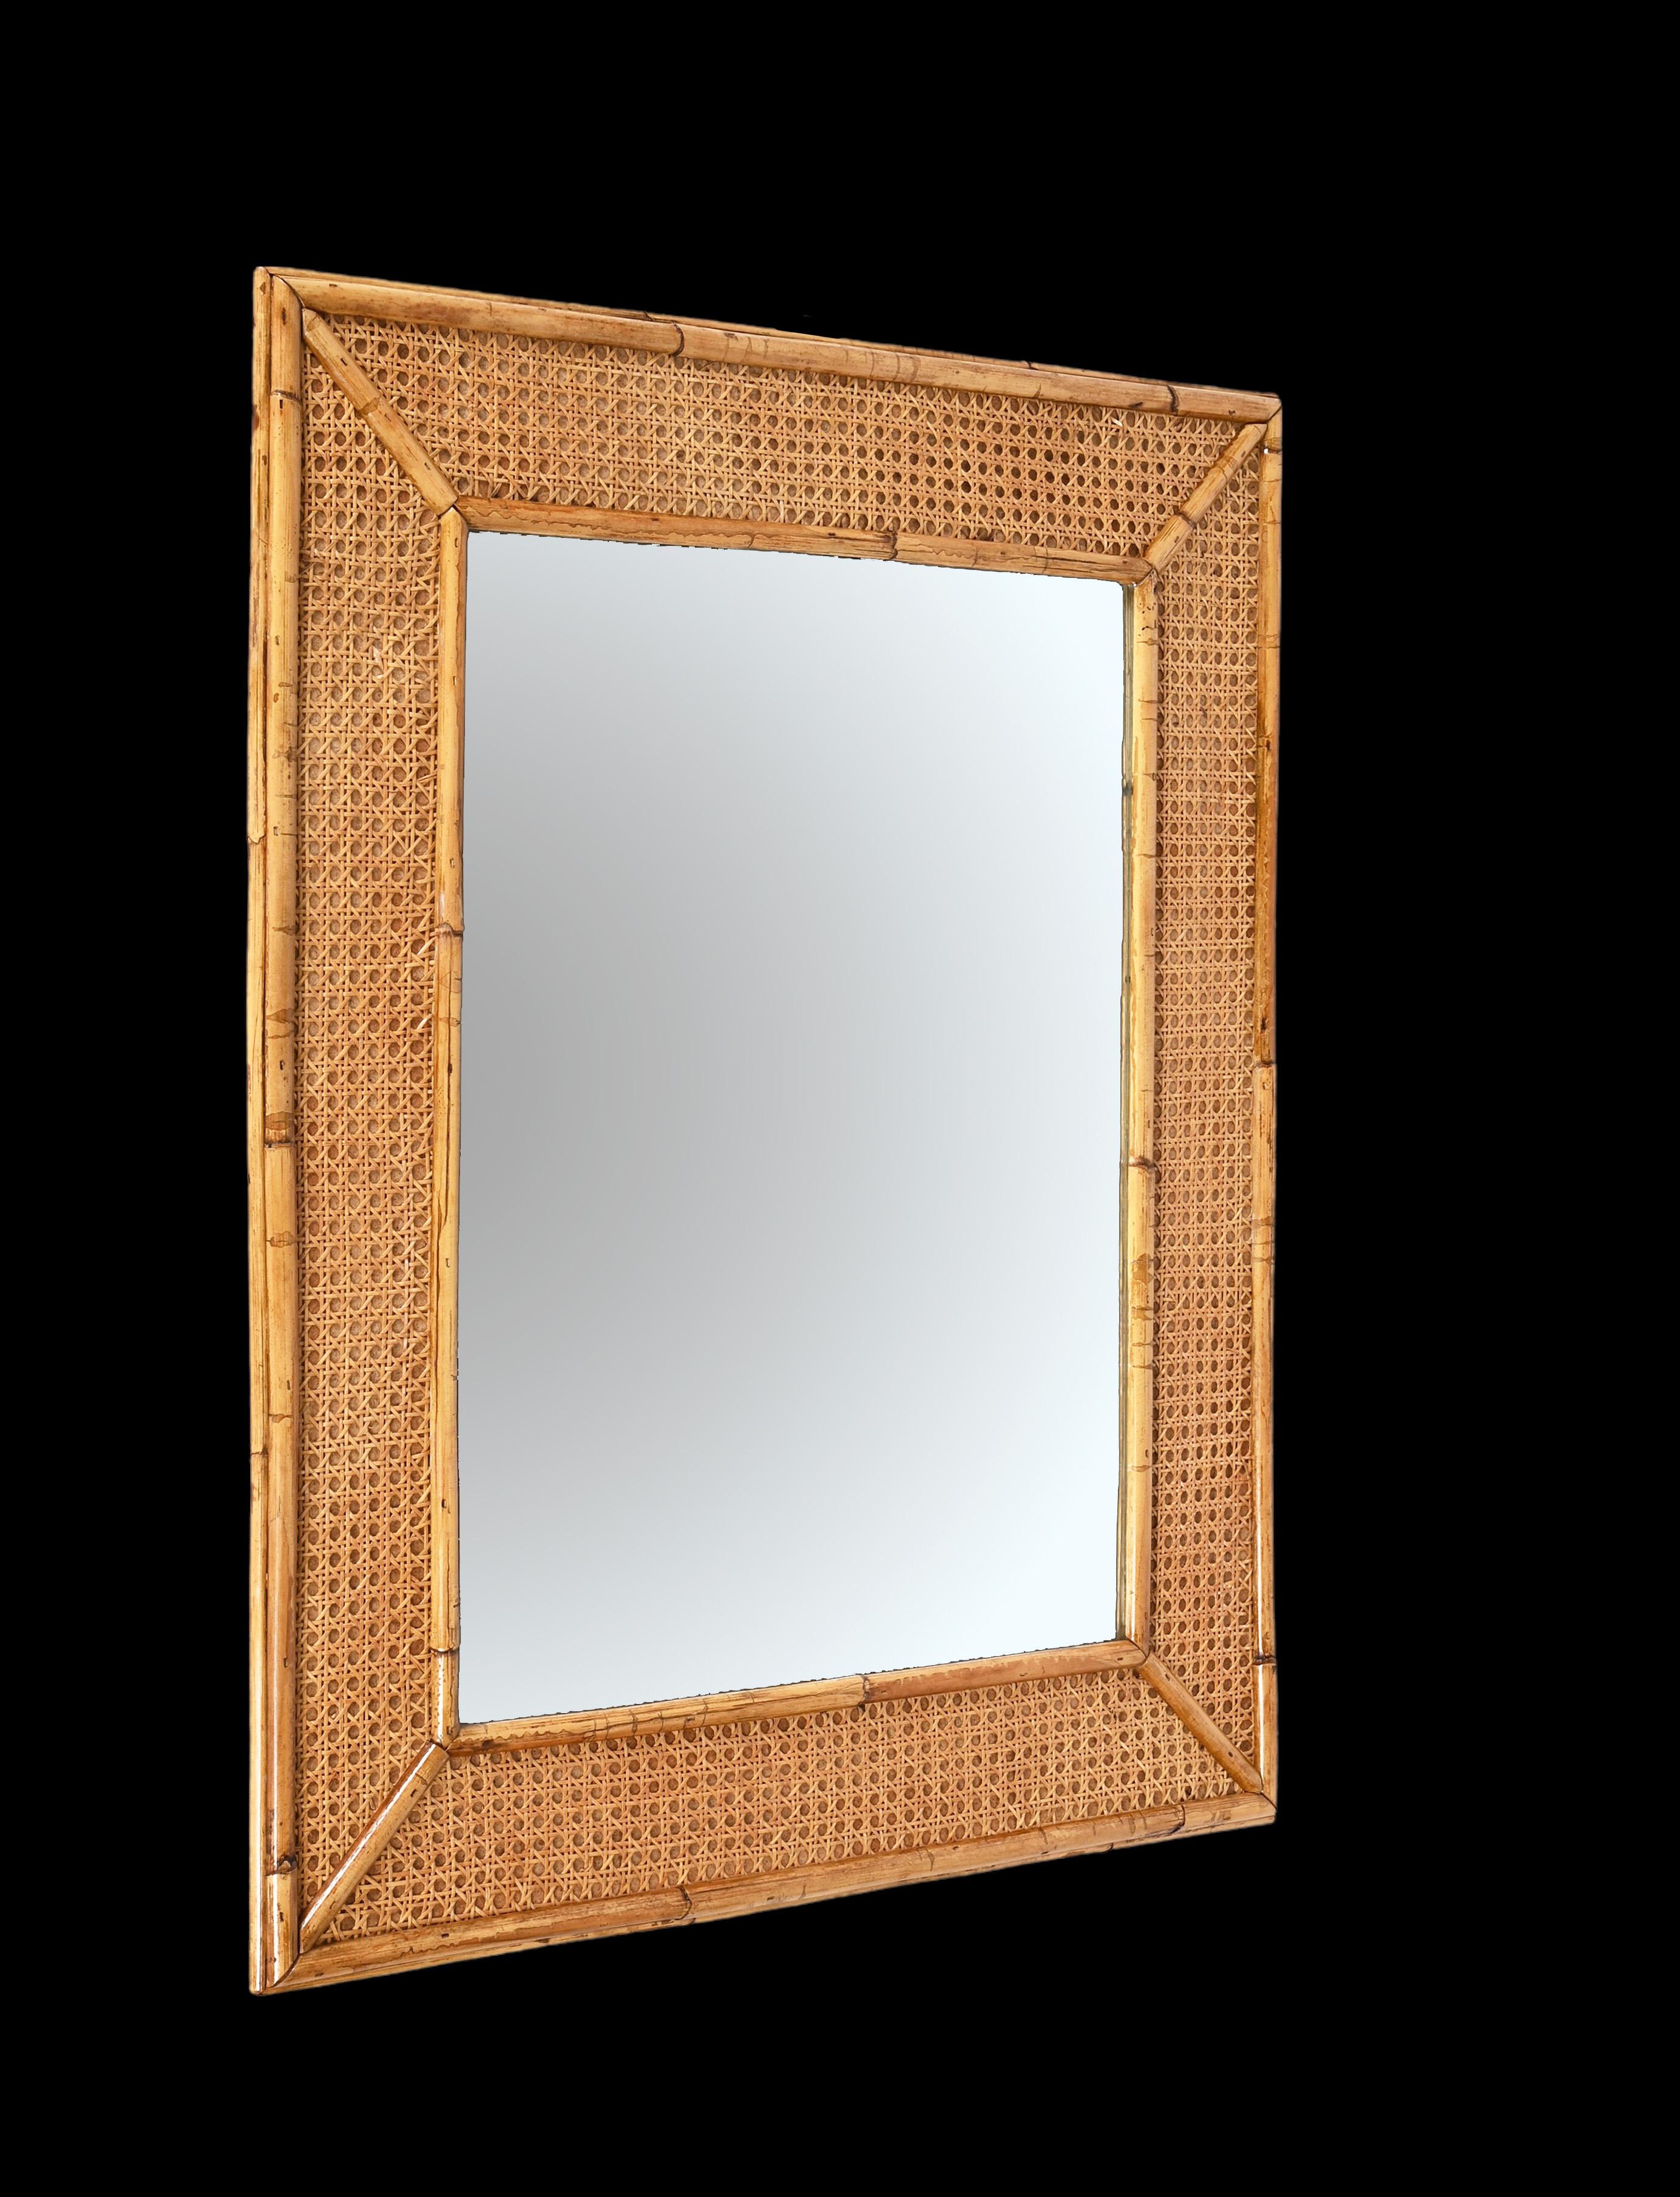 Mid-Century Modern Midcentury Rectangular Italian Mirror with Bamboo and Vienna Straw Frame, 1970s For Sale